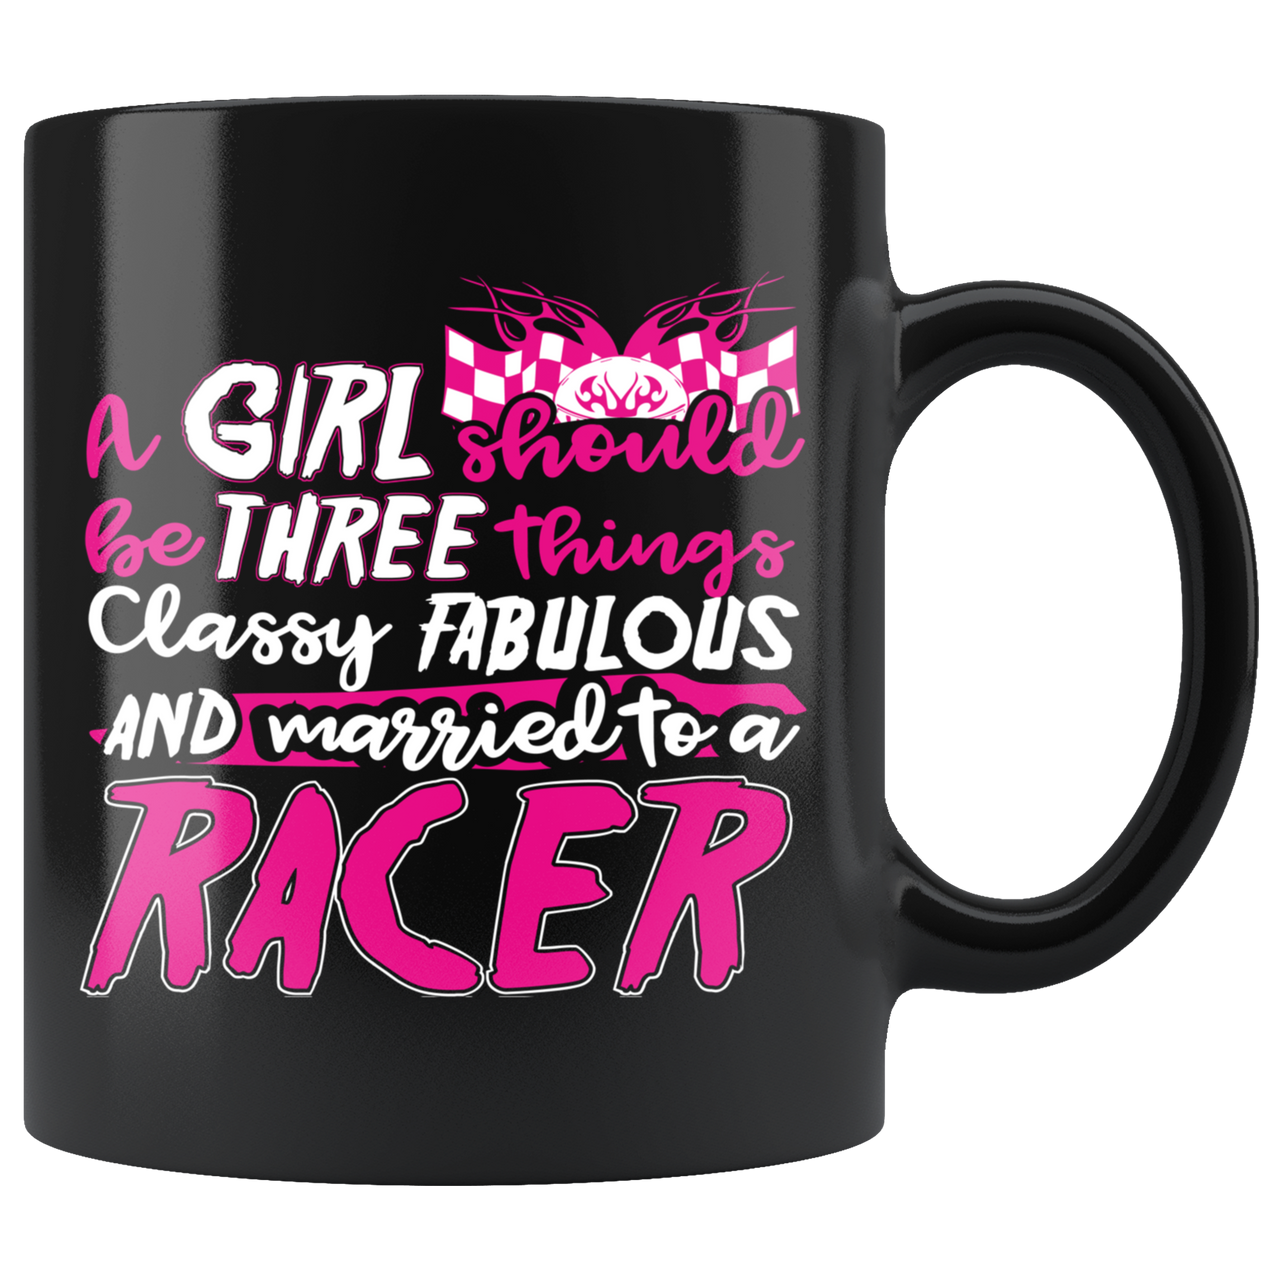 A Girl Should Be 3 Things Classy Fabulous And Married To A Racer Mug!